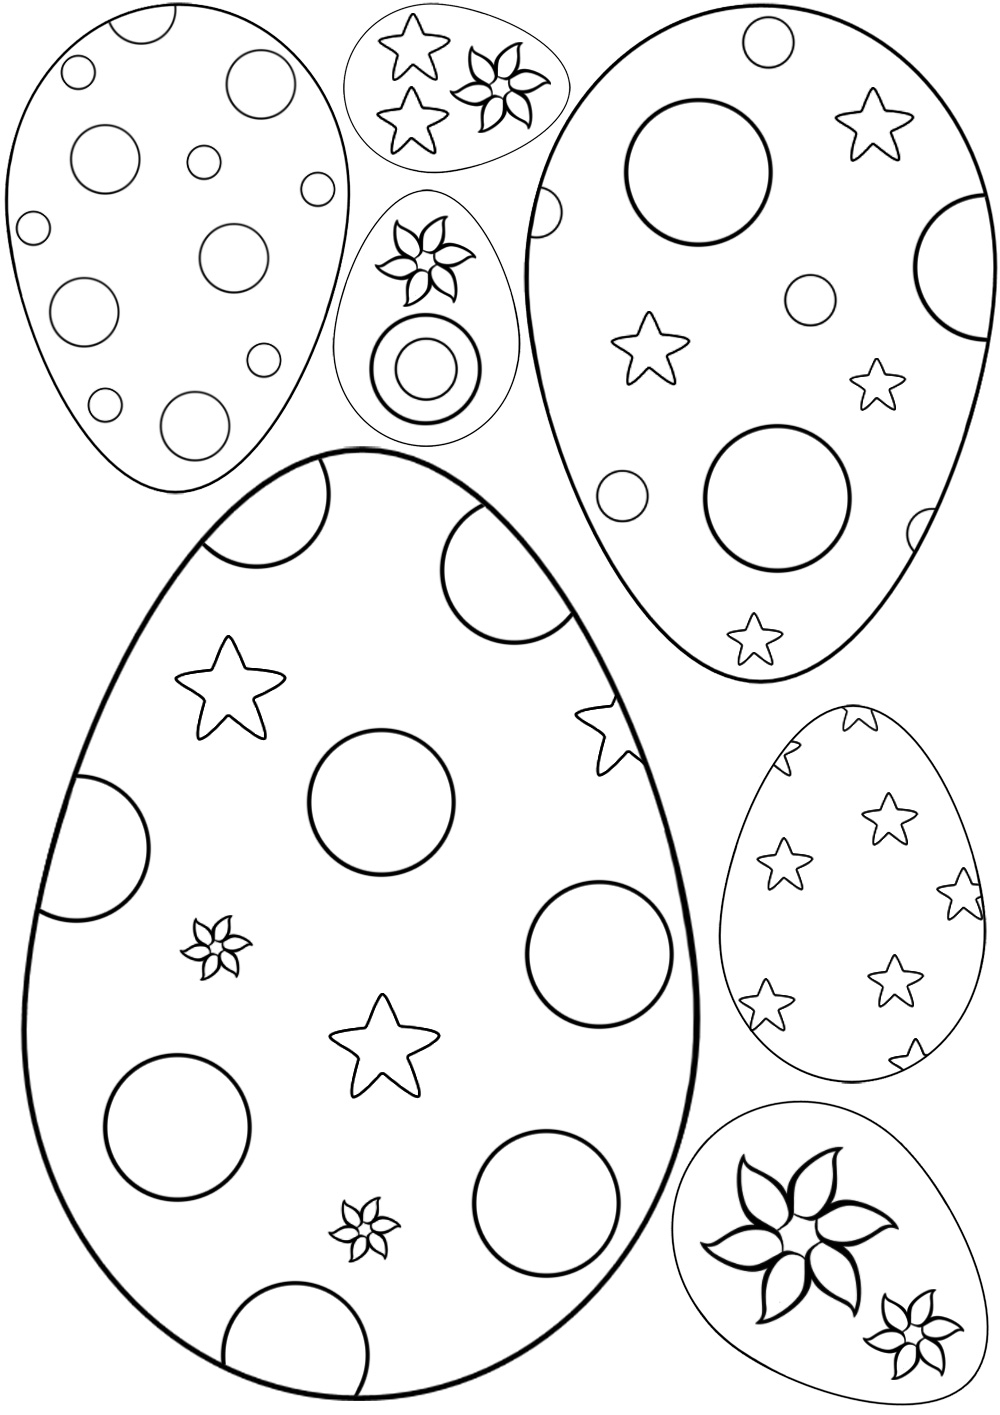 download-242-abstract-figure-easter-egg-coloring-pages-png-pdf-file